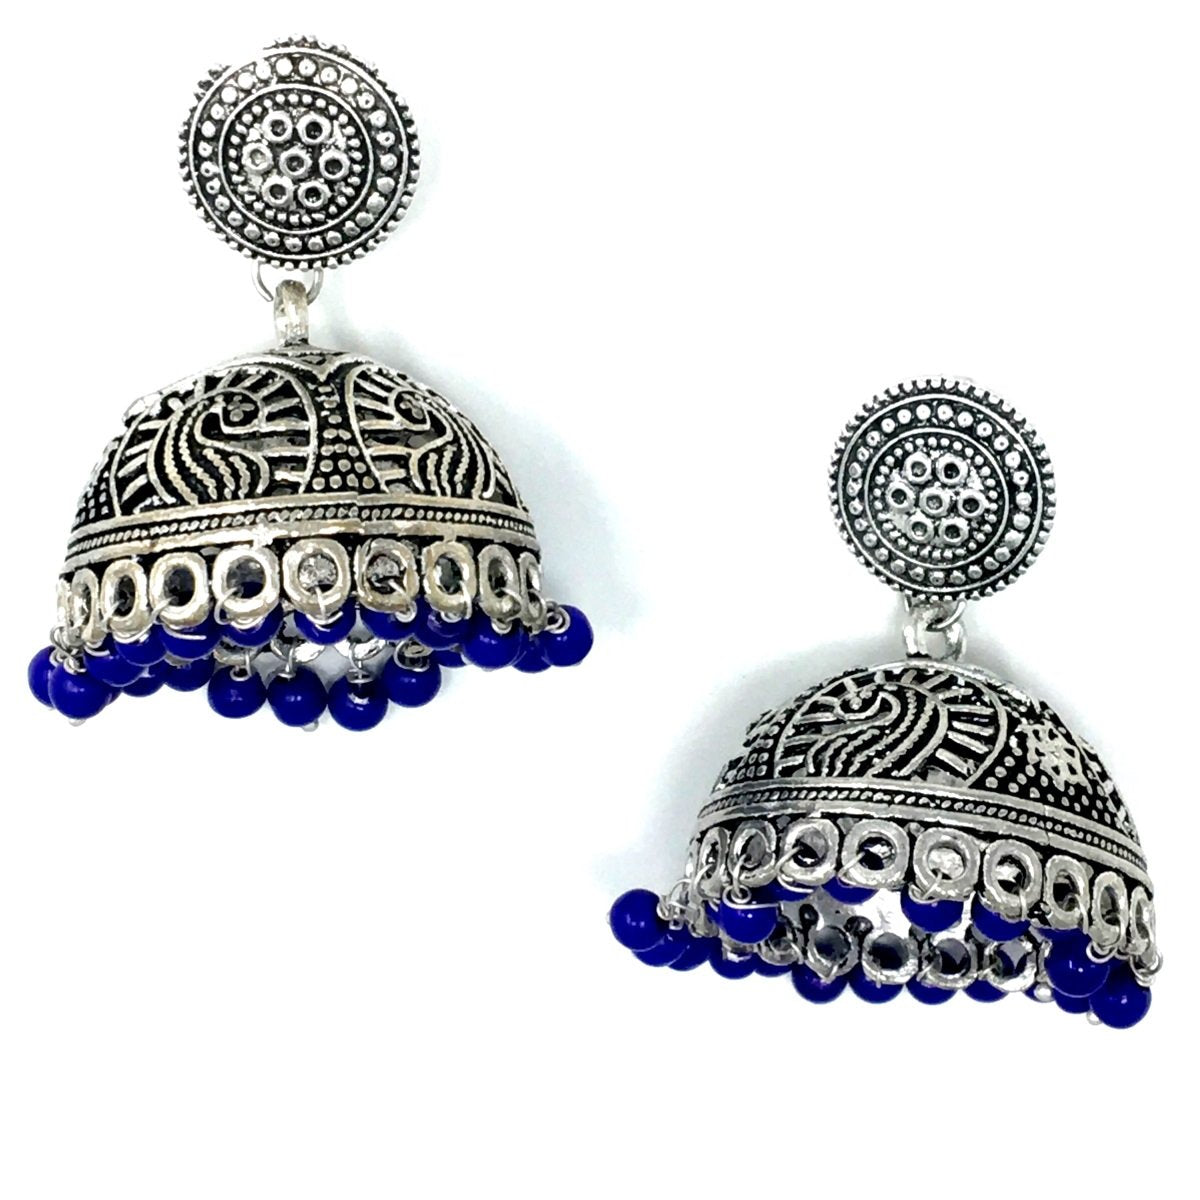 Antique Silver Jhumka with Blue Beads Earrings